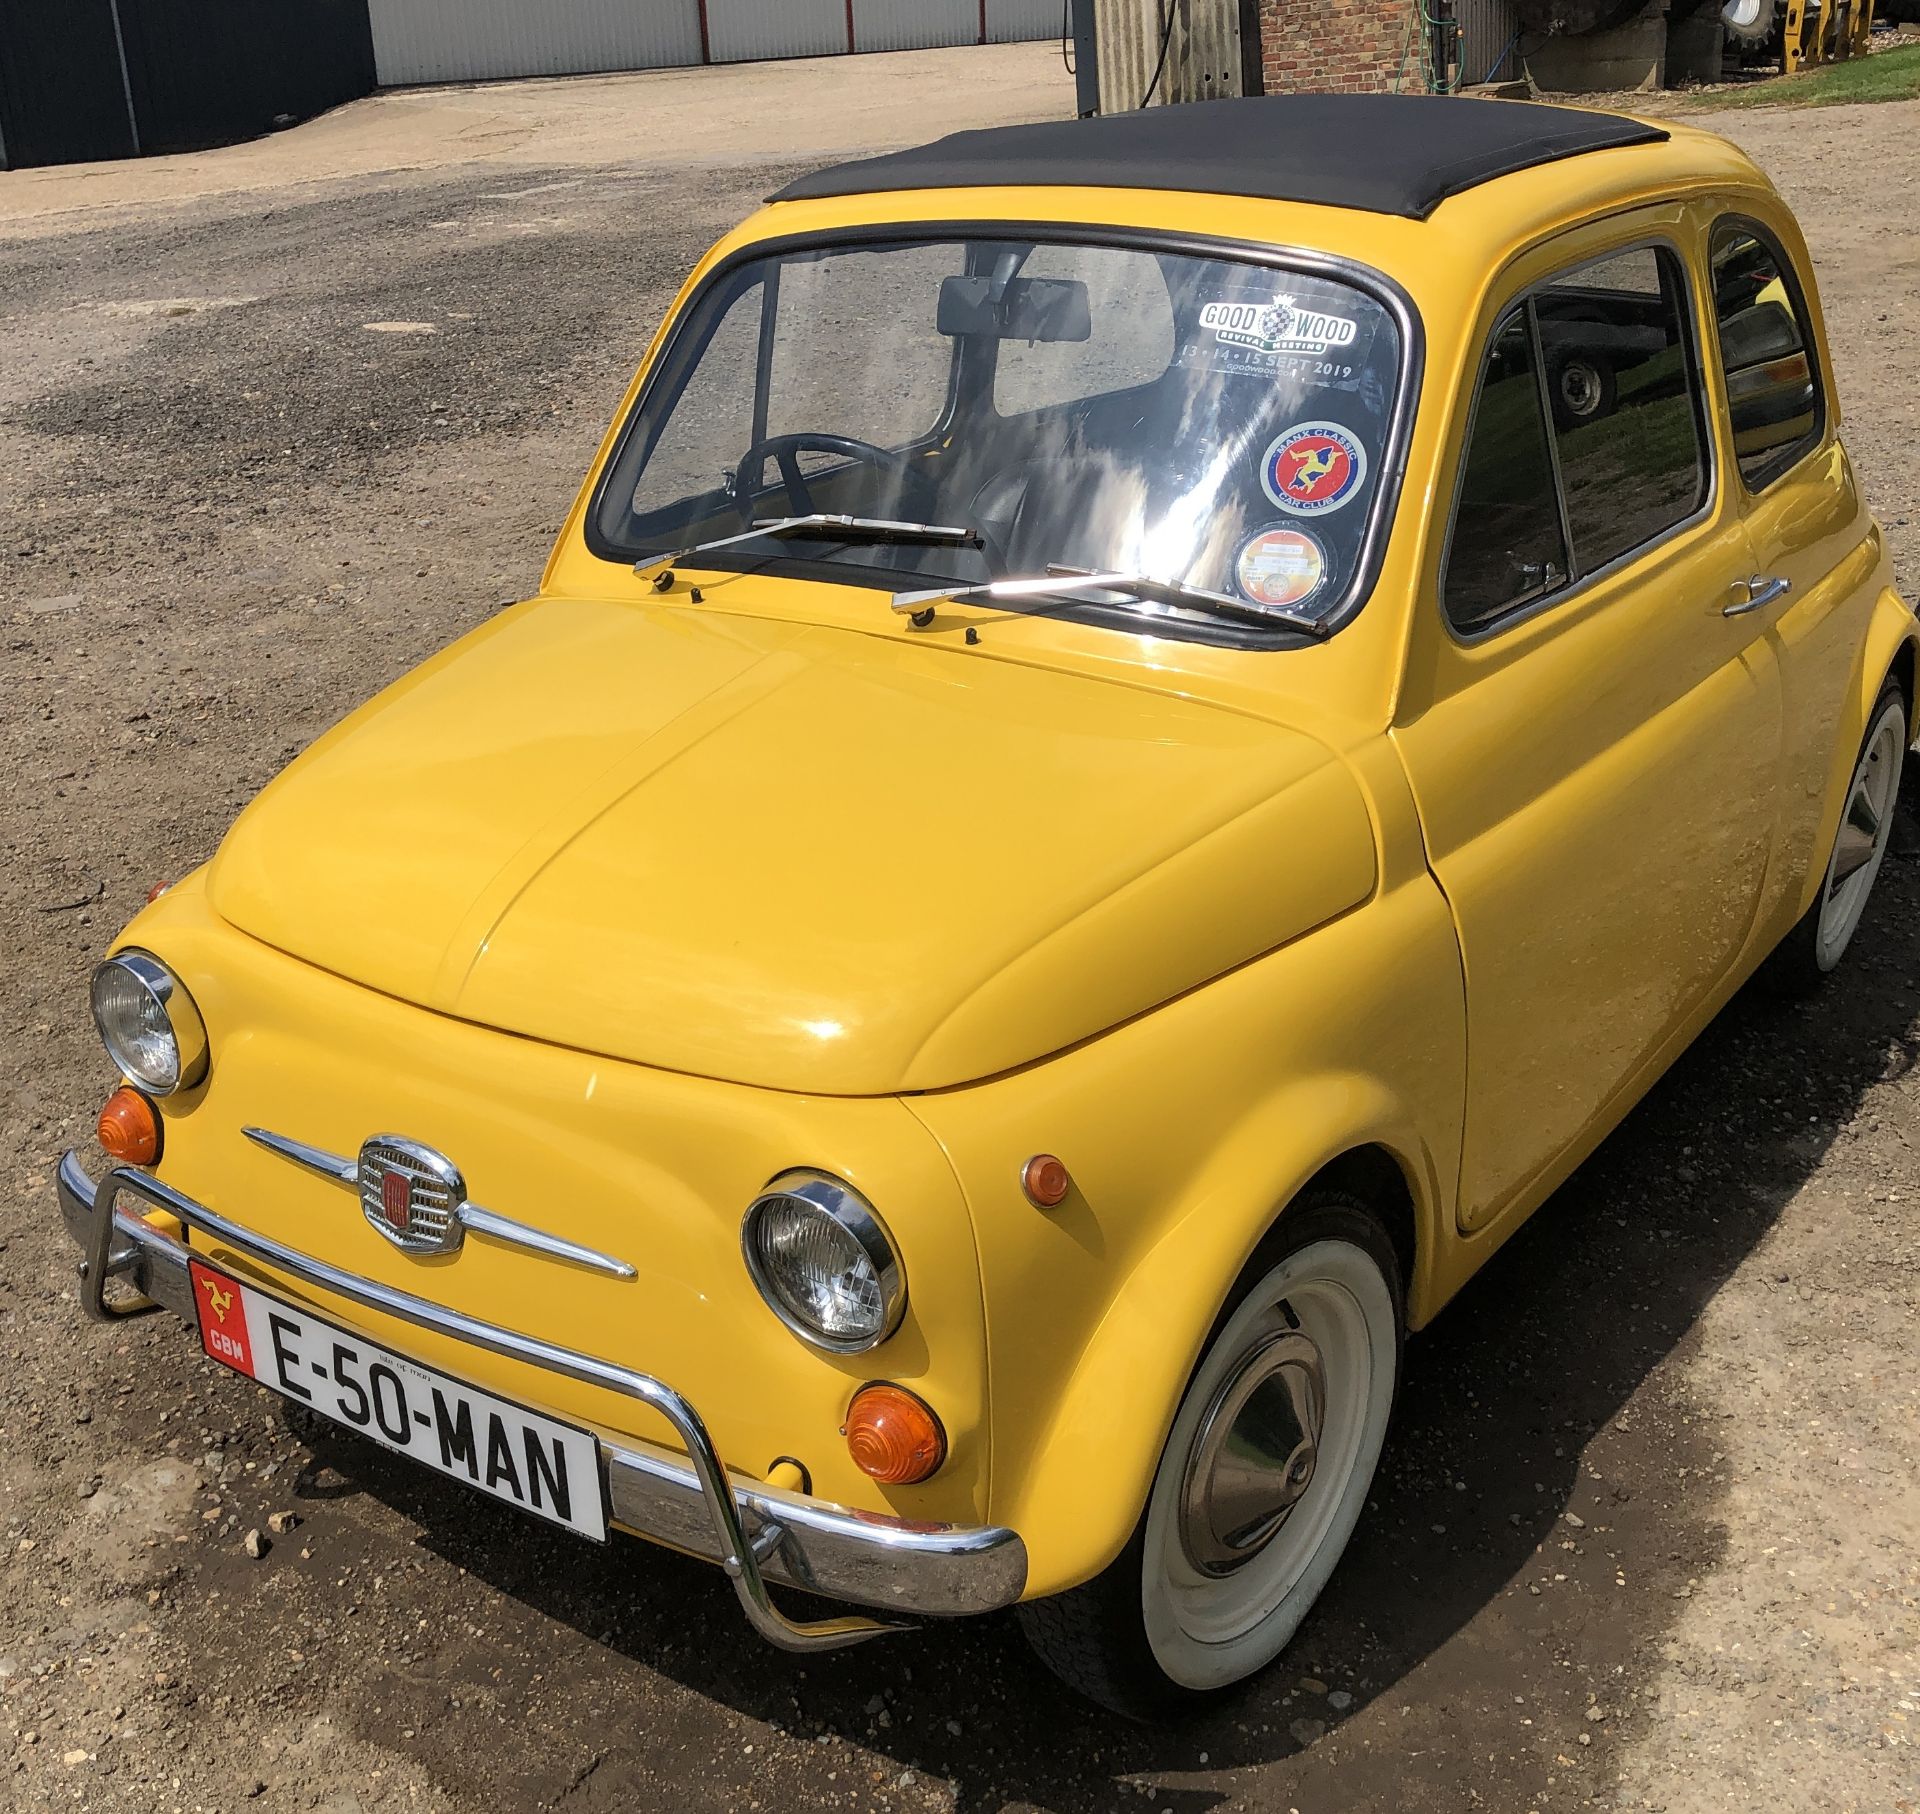 1972 Fiat 500 Saloon, Registration E-50-Man (IOM, Formally Registered as TGF 249L), First Registered - Image 9 of 34